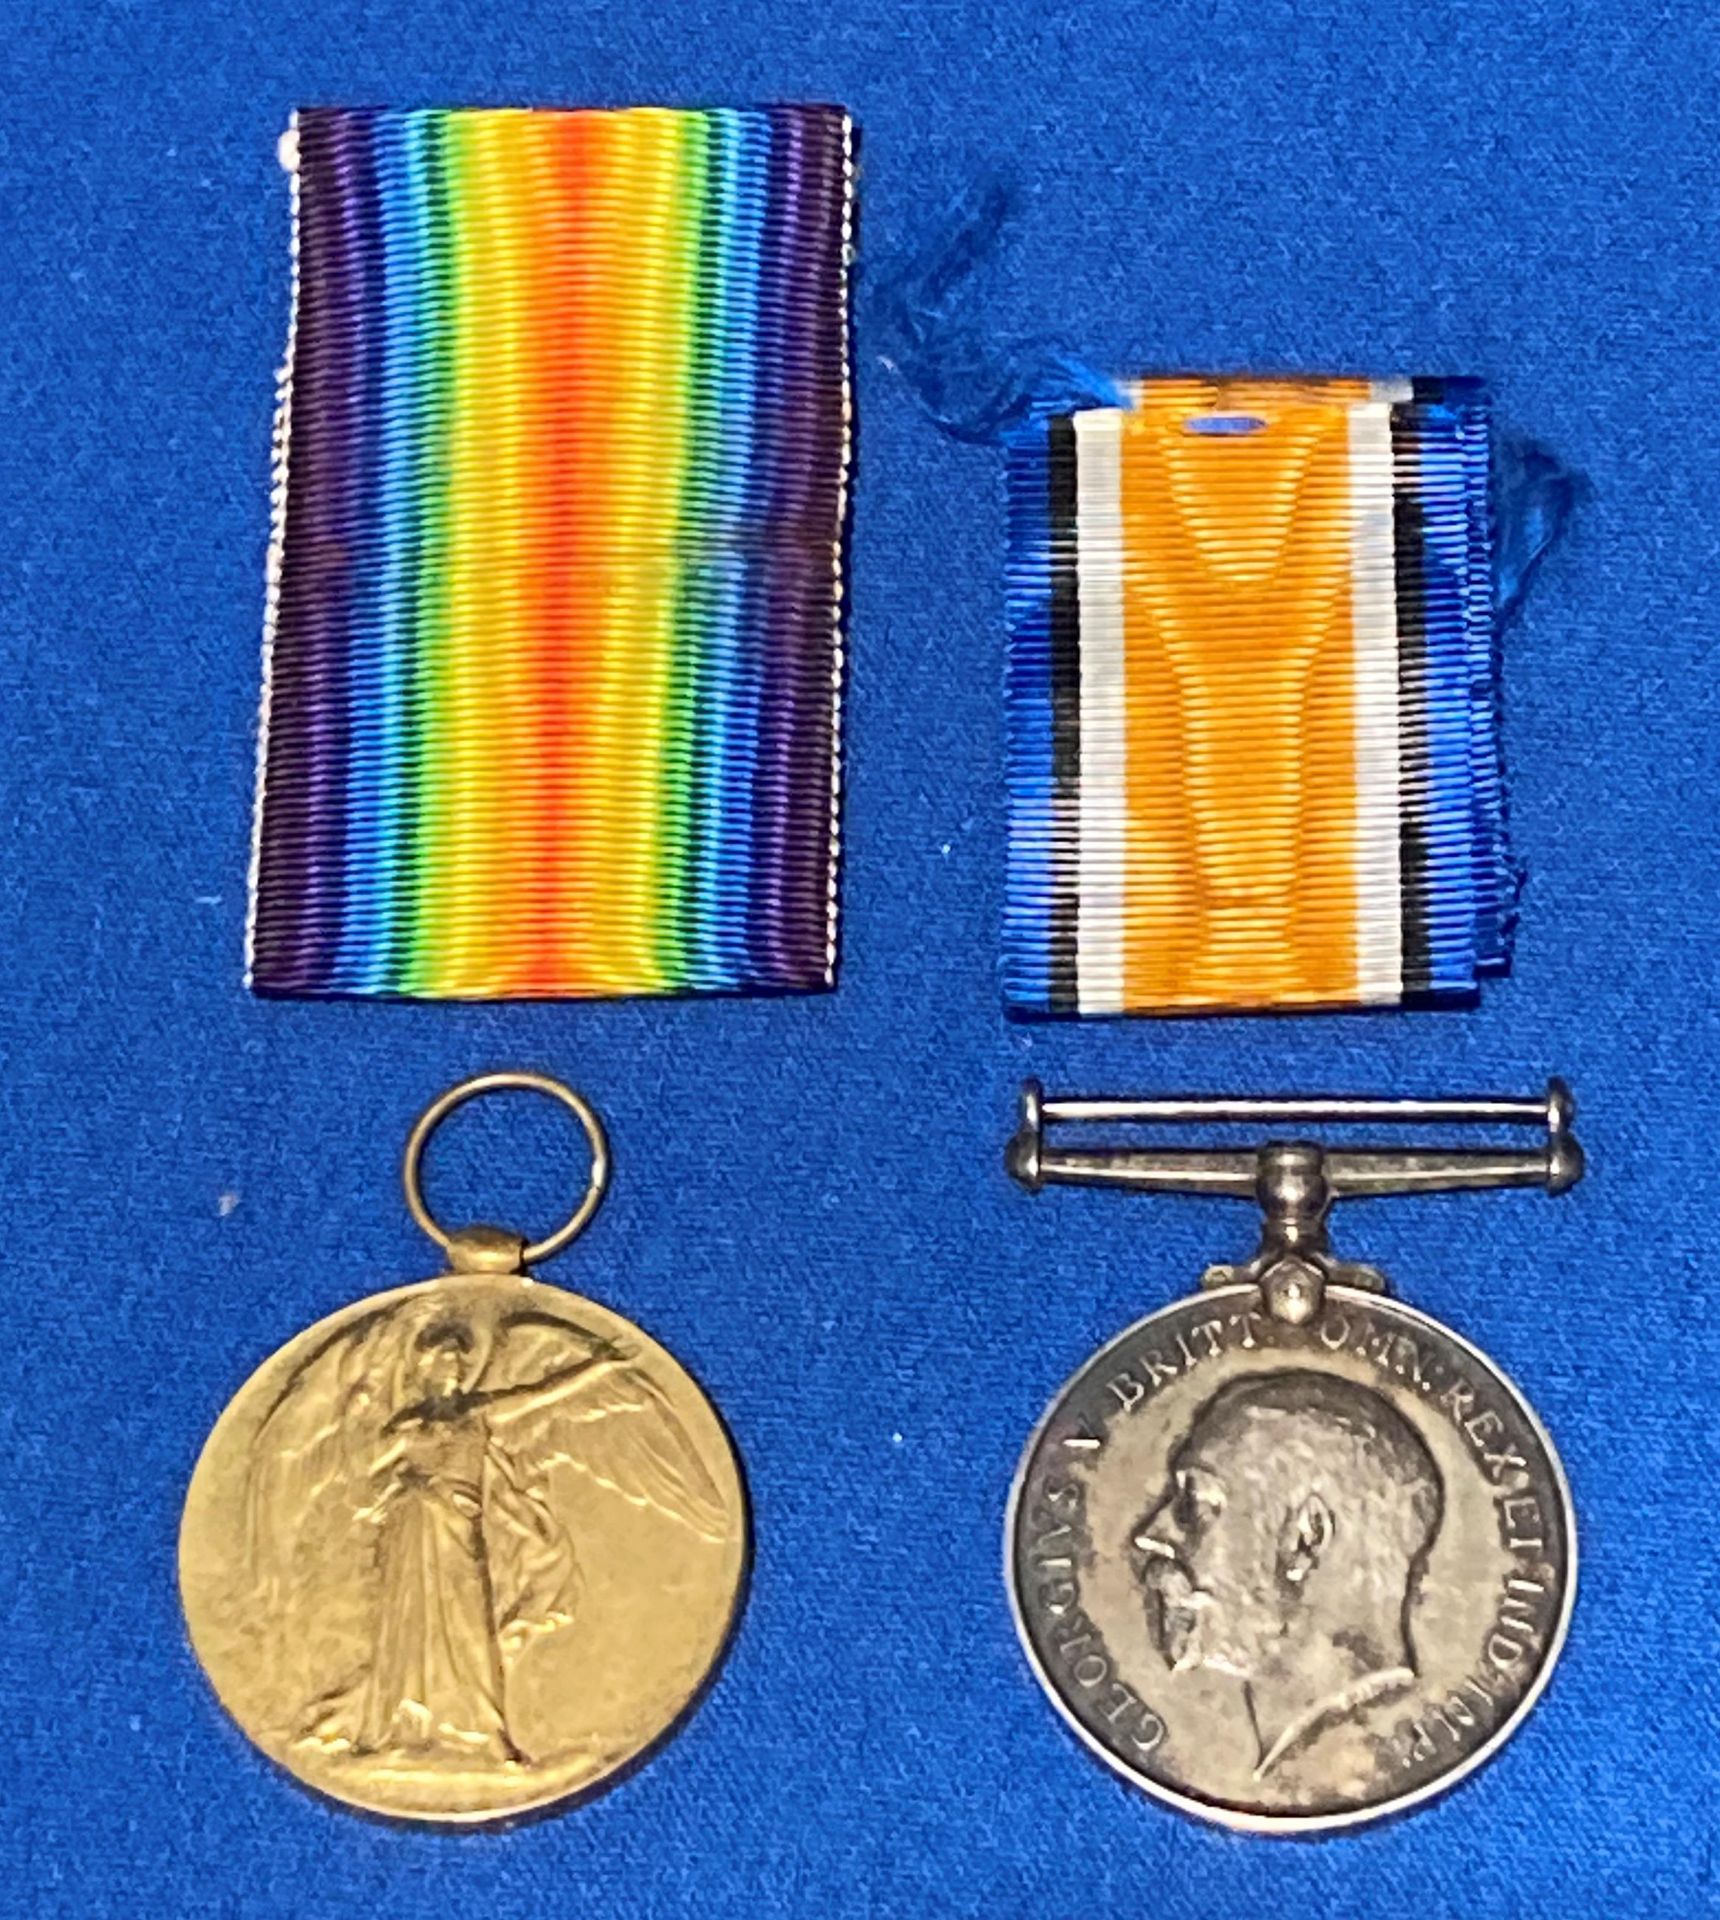 Two First World War medals to 20247 Pte. JF Hornby W. - Image 5 of 6